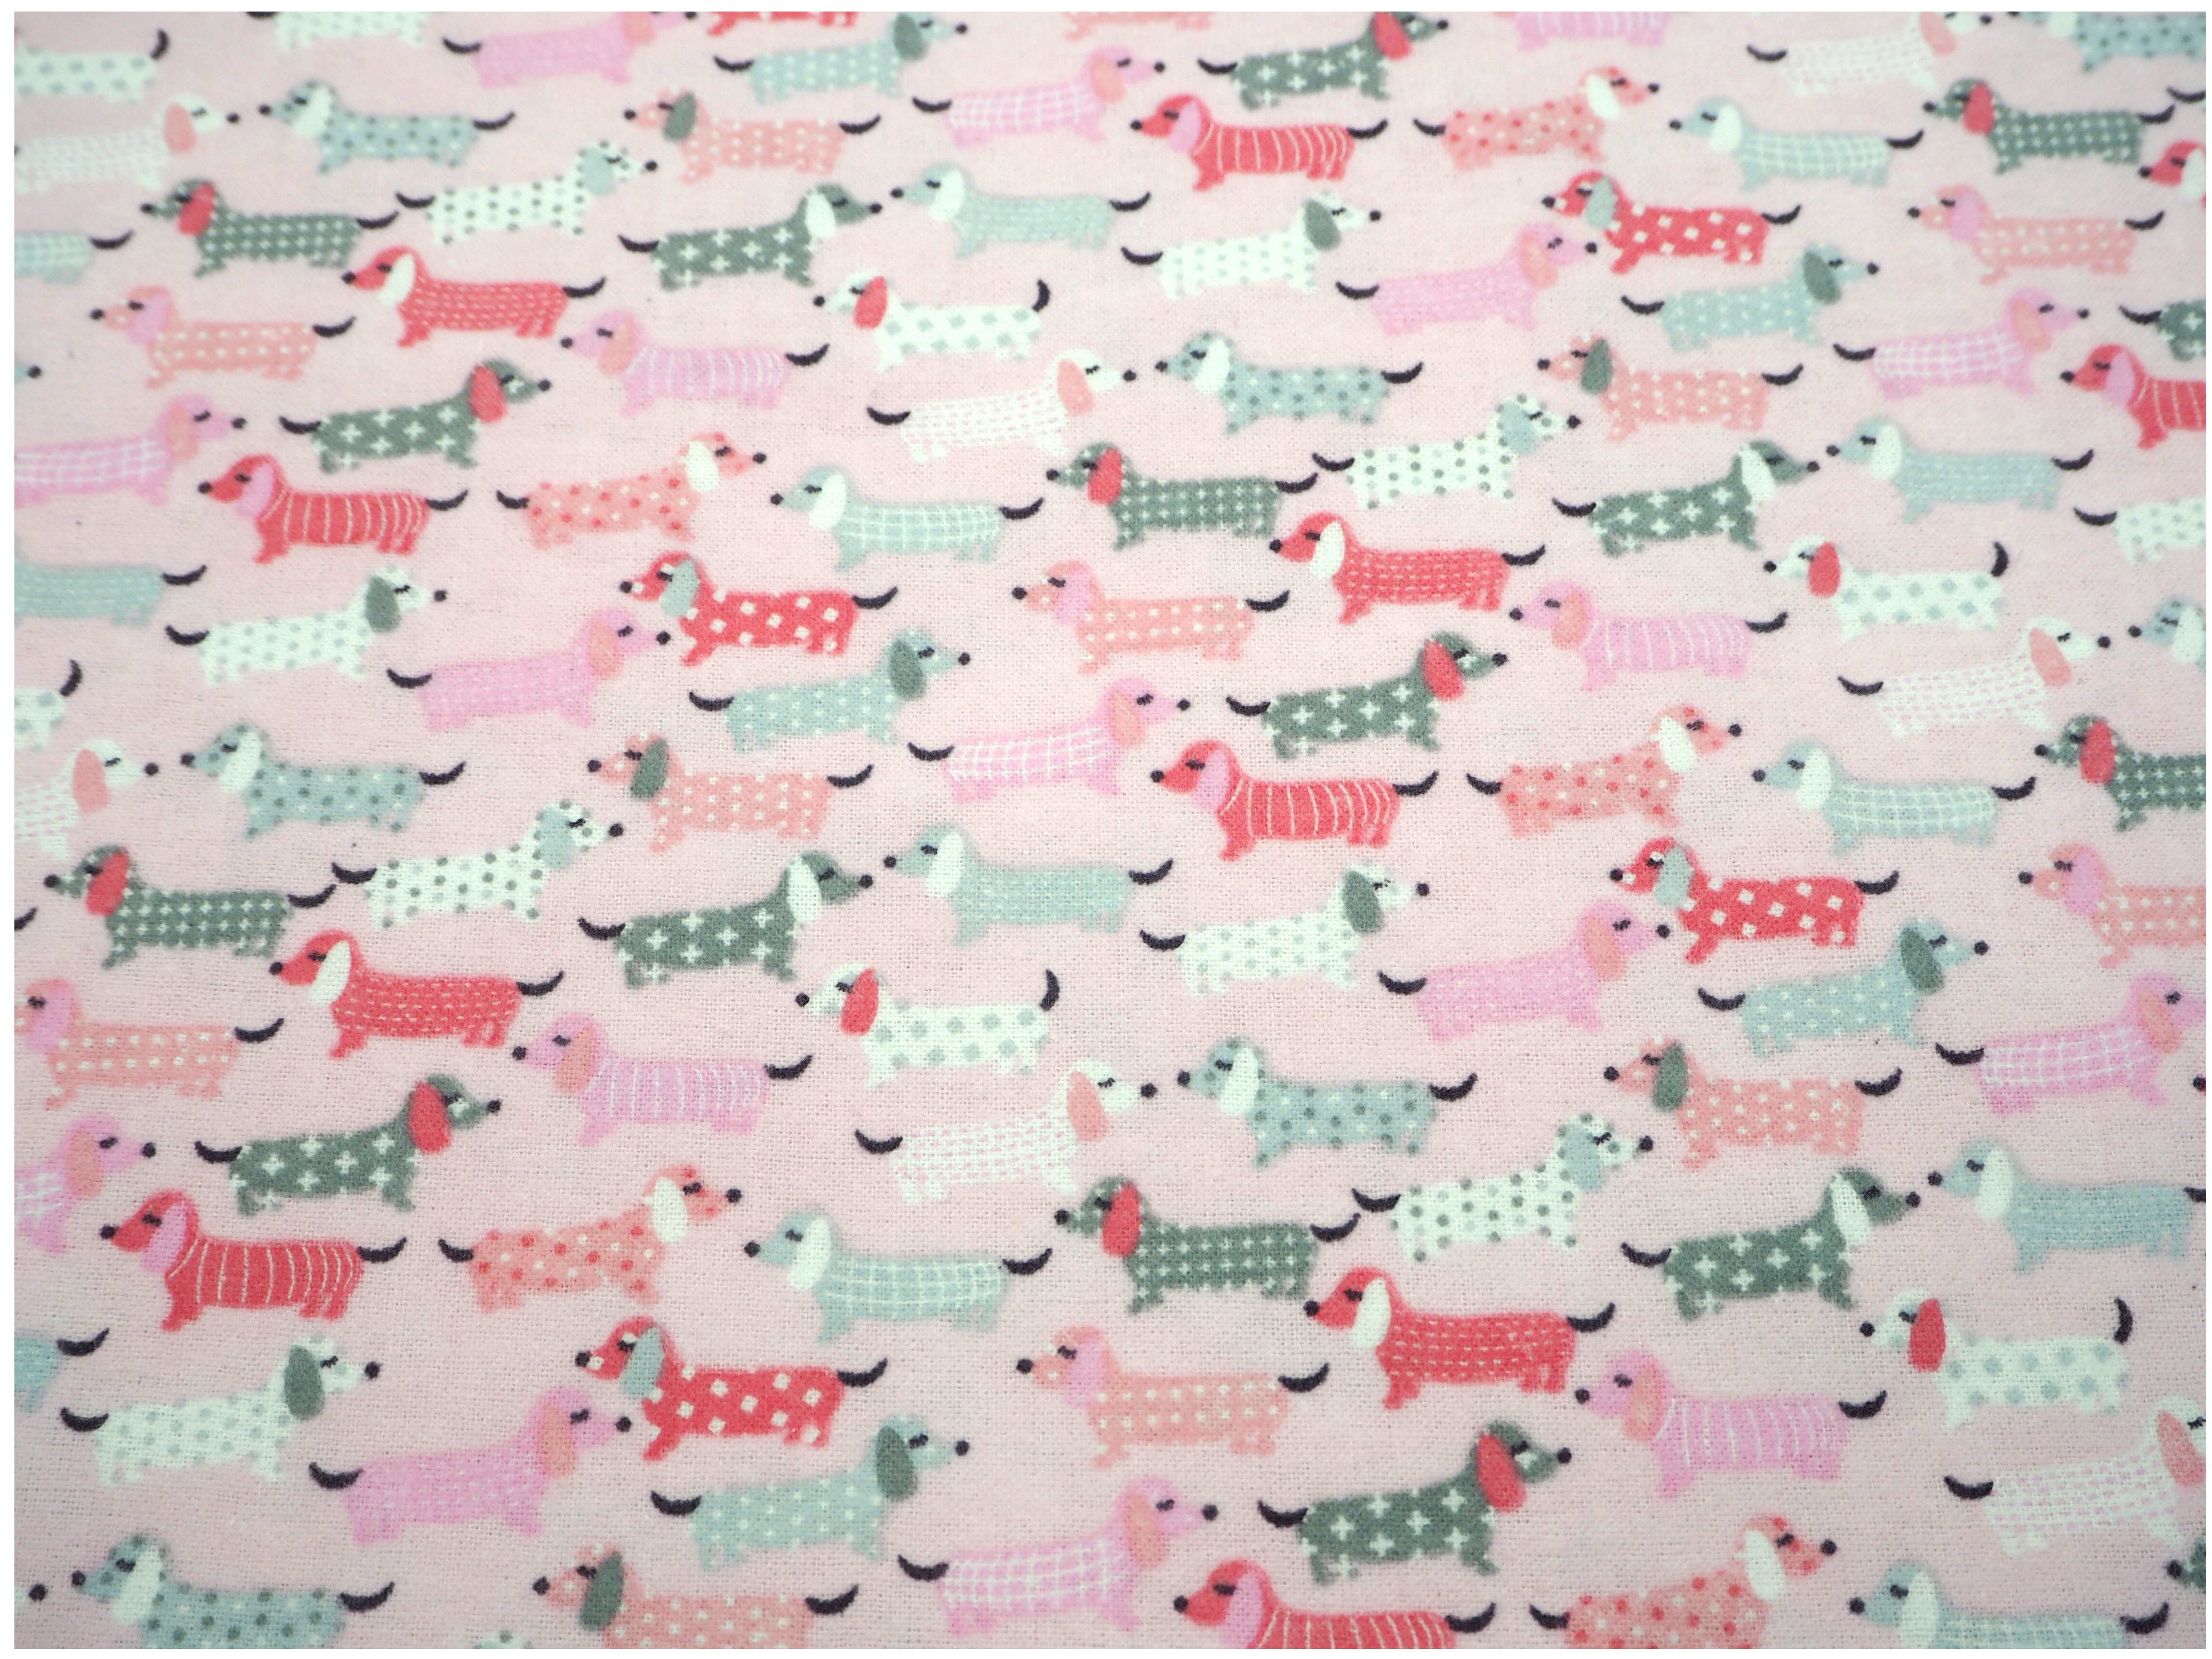 Fabric view of A Sack Of Wheat, featuring pink, fluffy Dash Hounds on soft flannelette, 100% cotton fabric